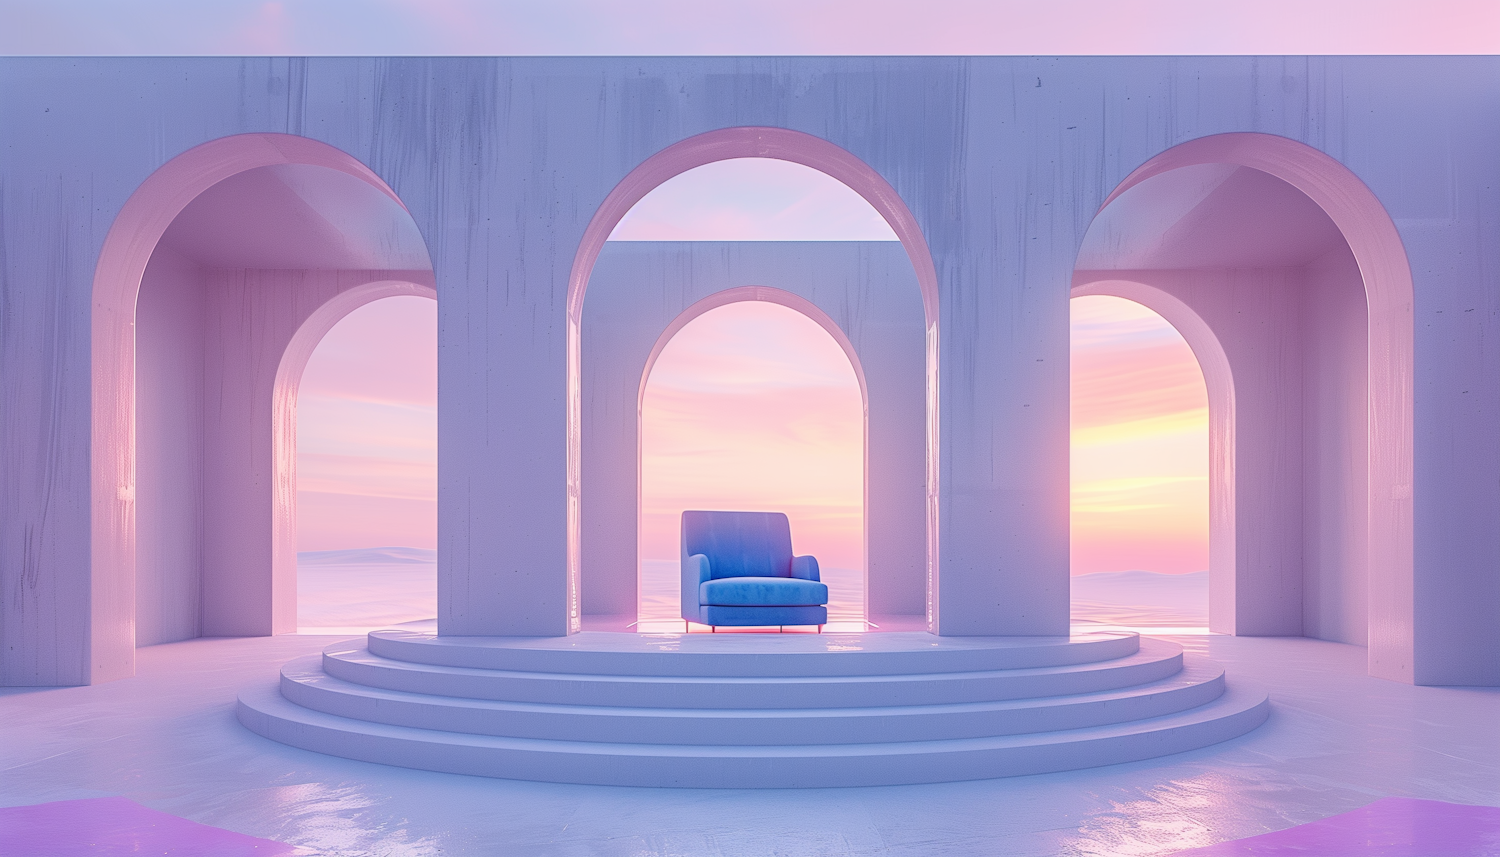 Solitary Blue Chair in Arched Passage